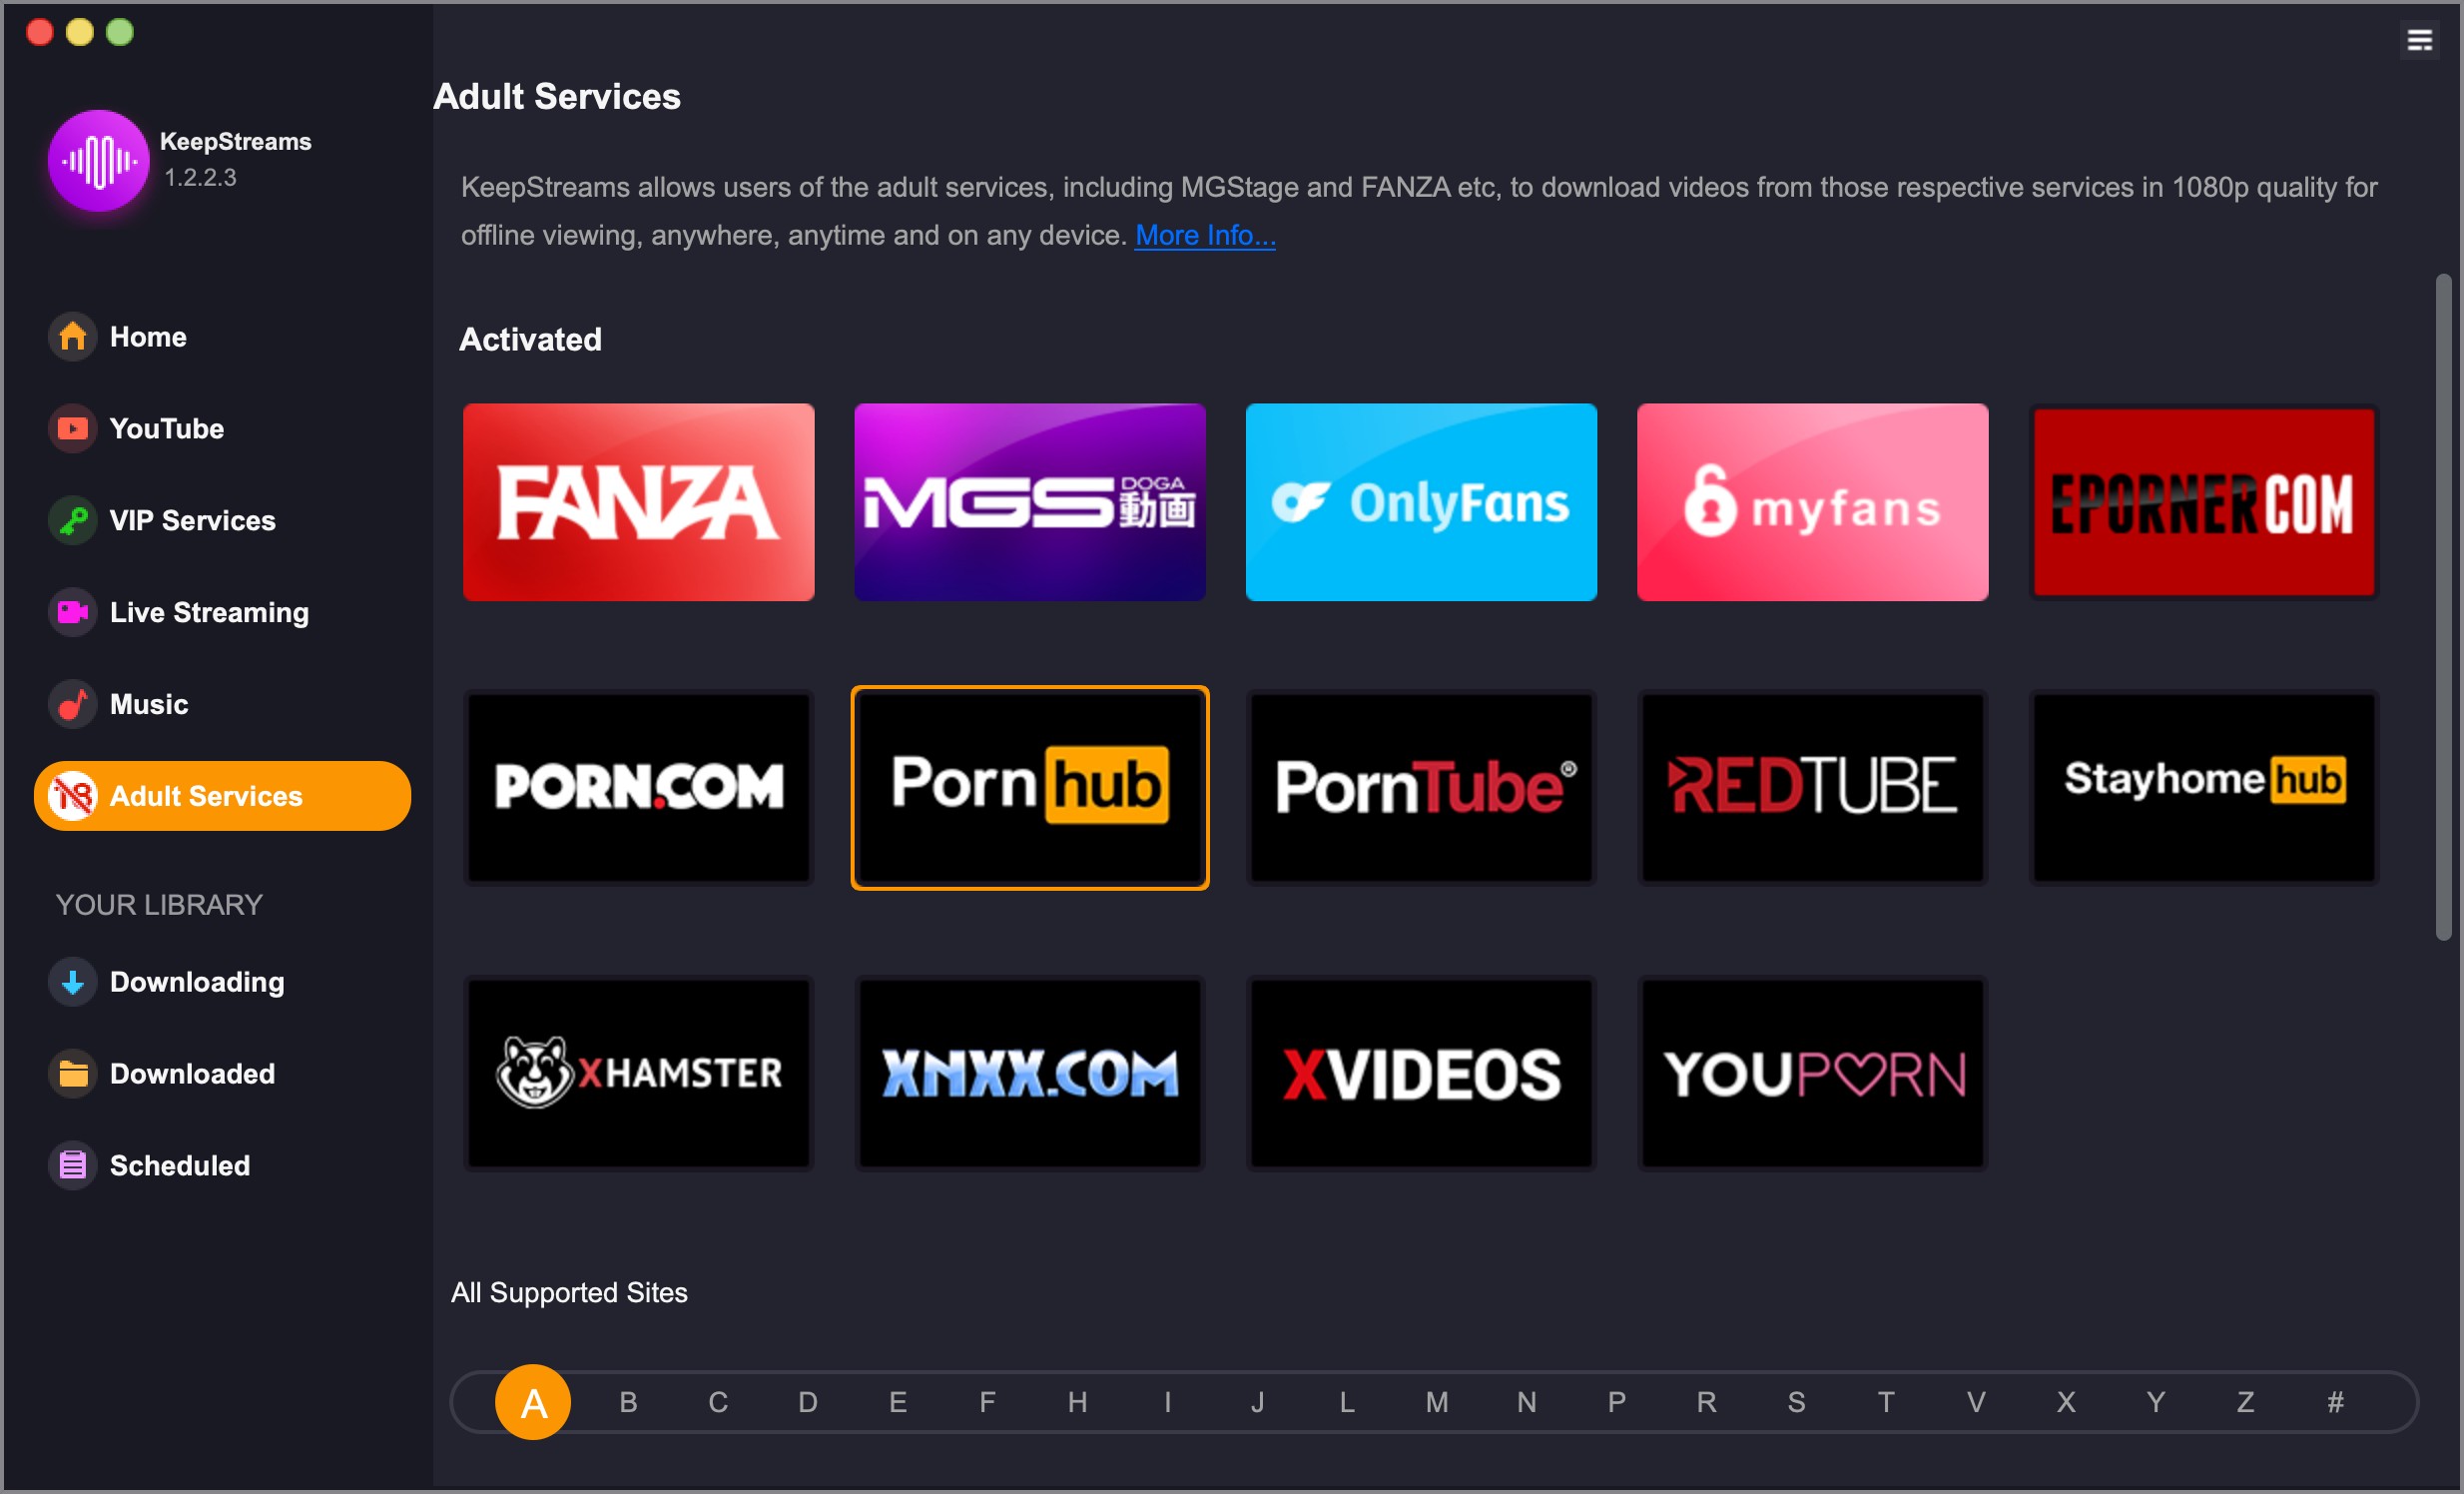 Choose Adult Services and then Pornhub